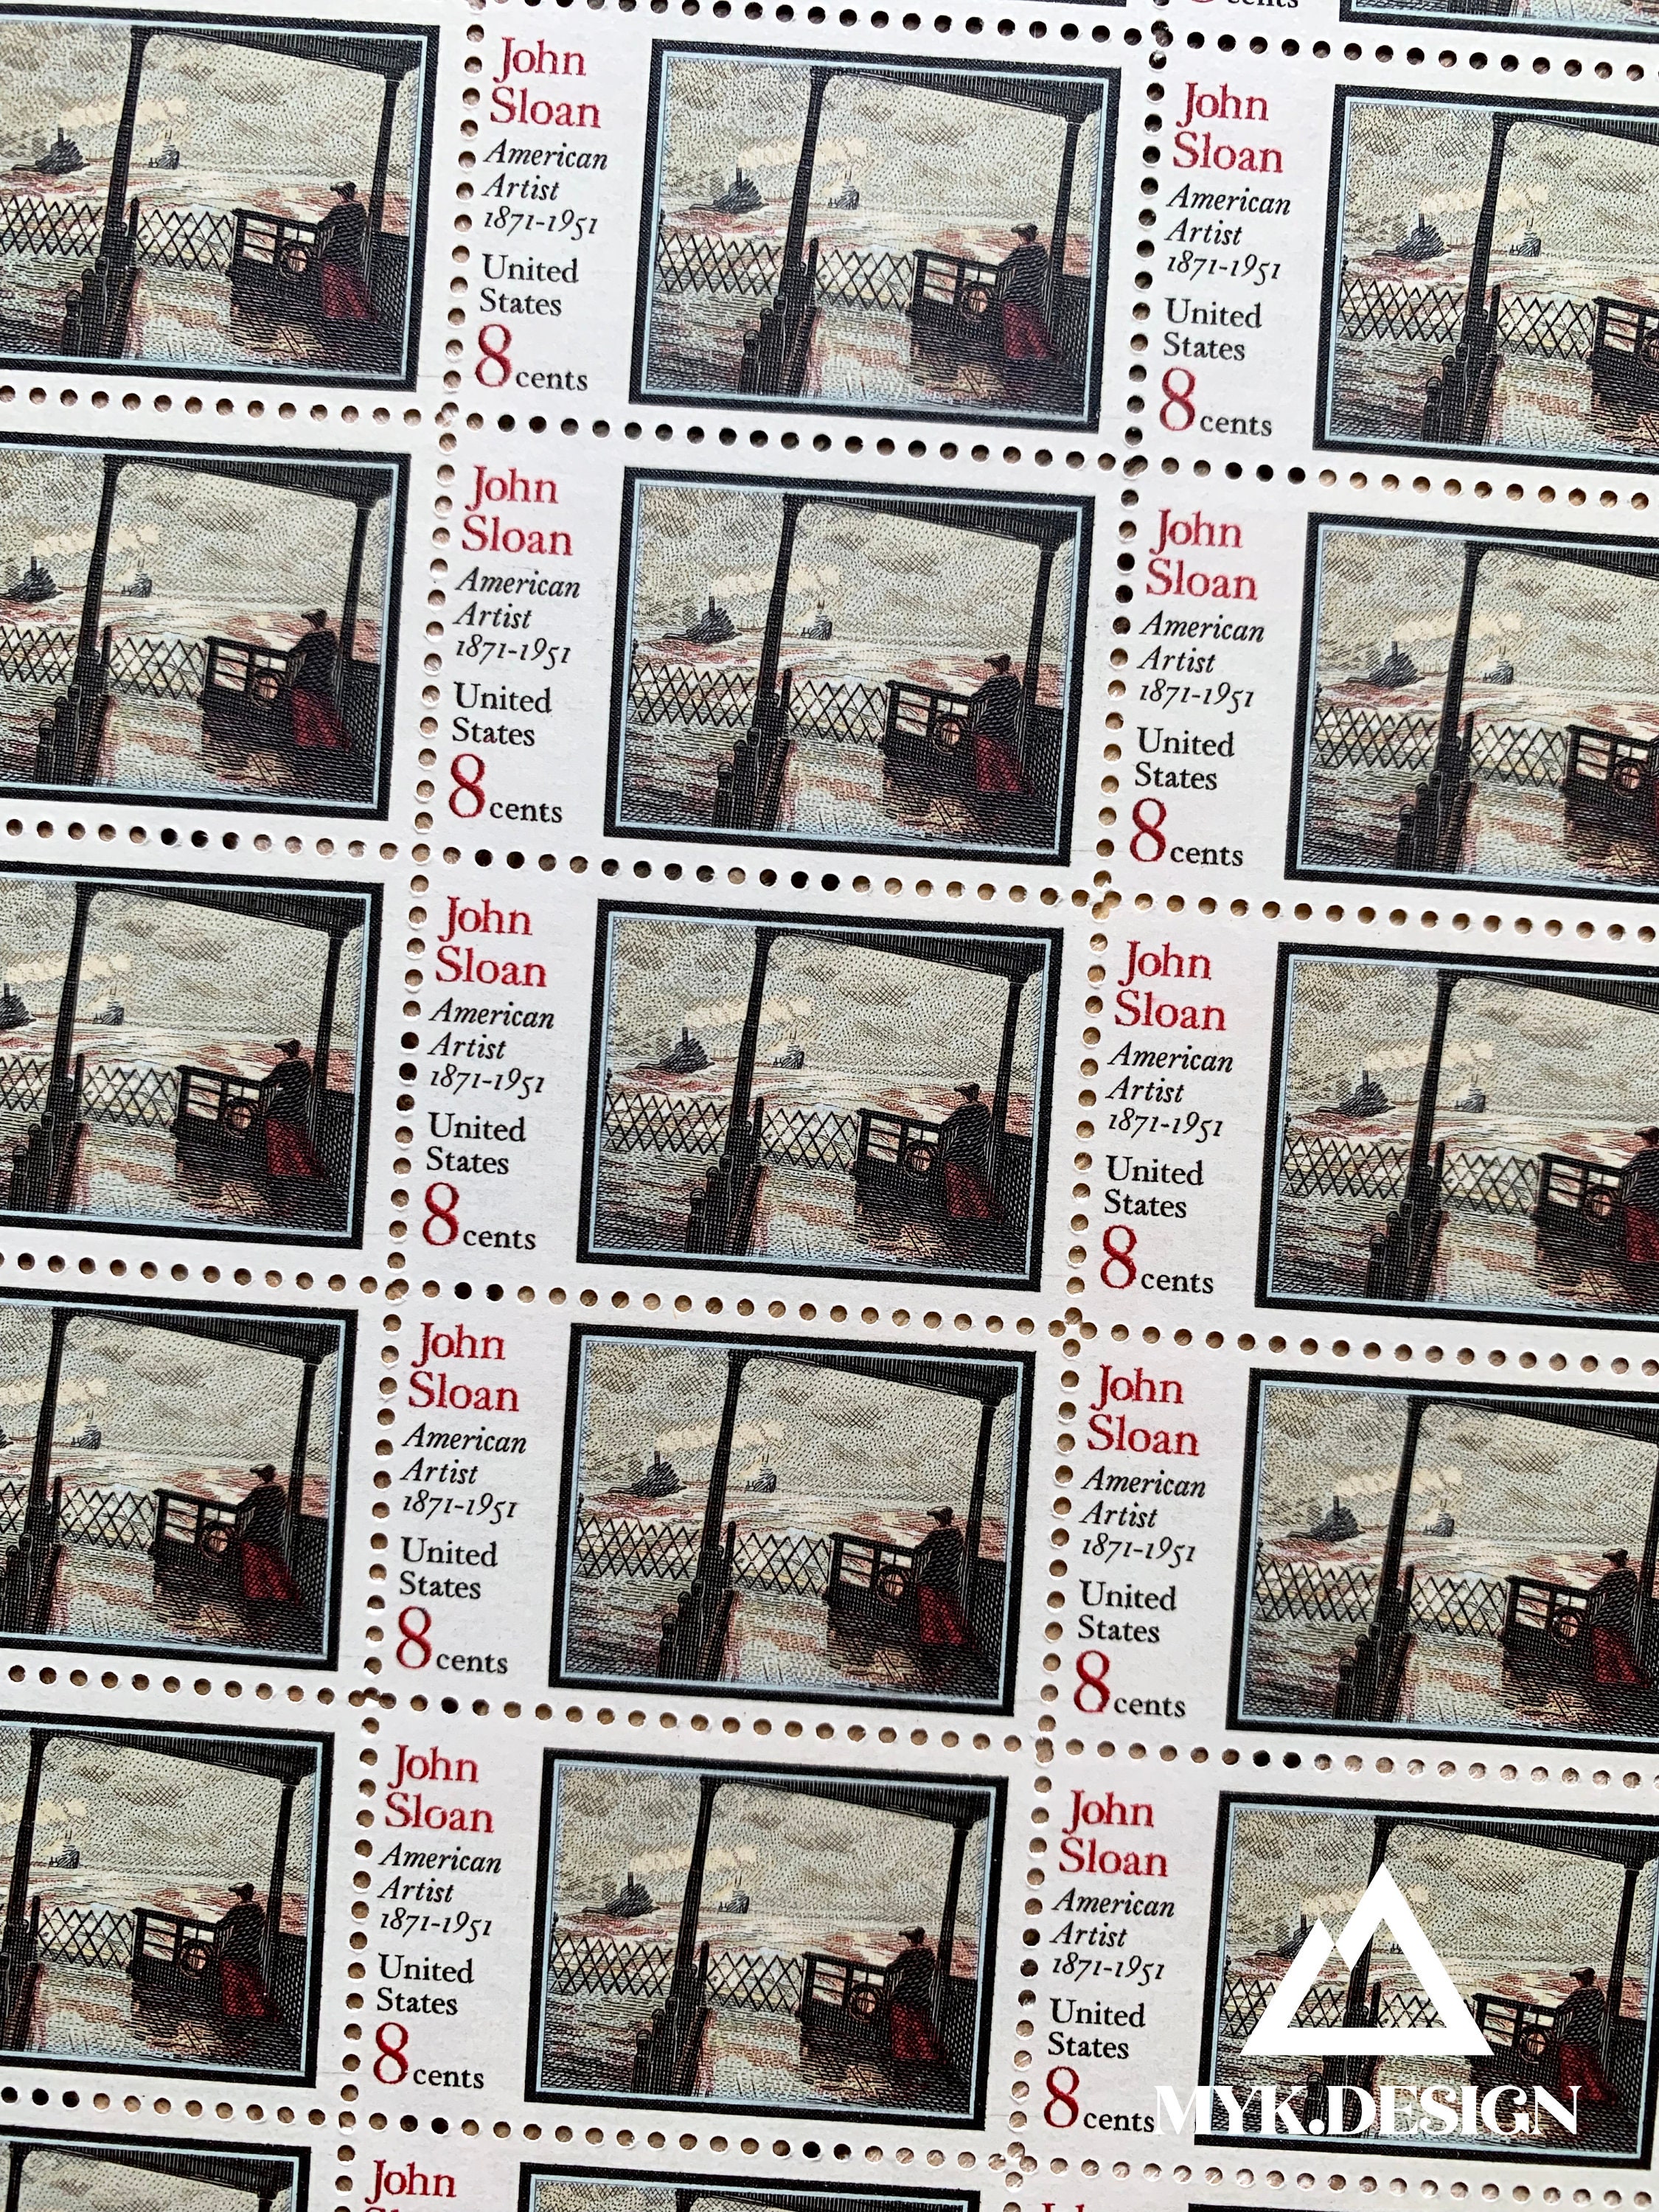 10 Unused Vintage Postage Stamps for Mailing Letters USPS  John Sloan Painting Art  8 cents  1971  No 1433